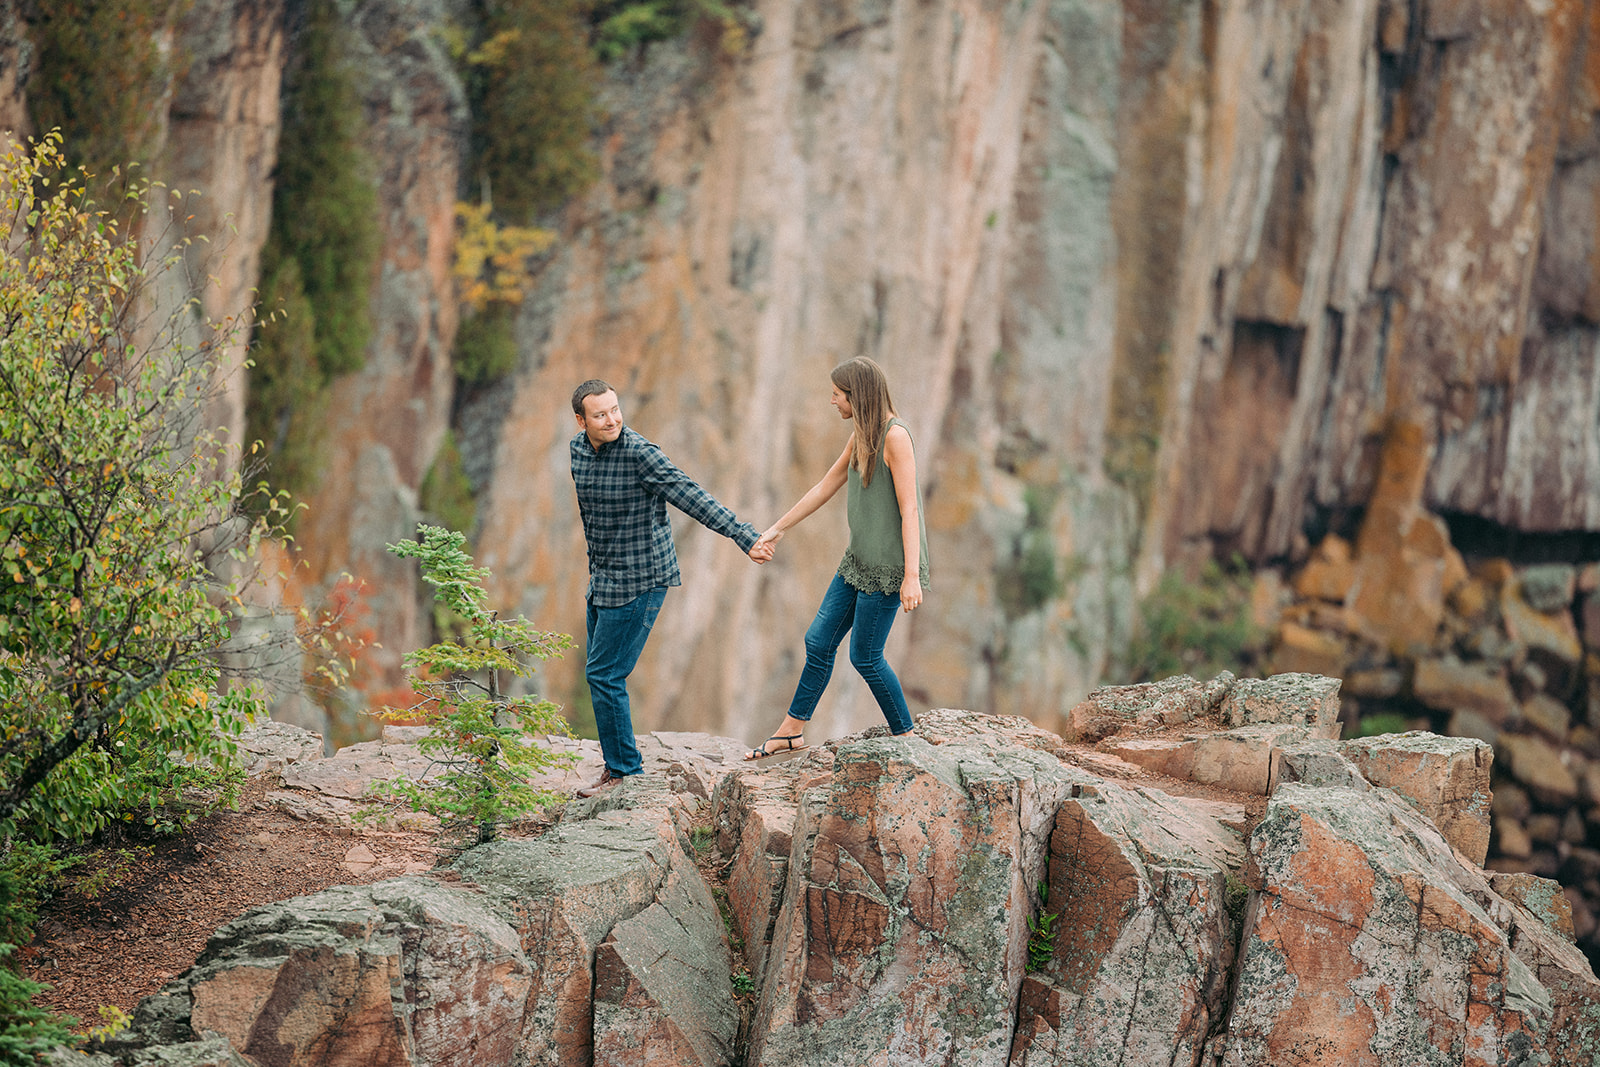 North Shore Engagement: Jenna and AJ against the stunning backdrop of Palisade Head